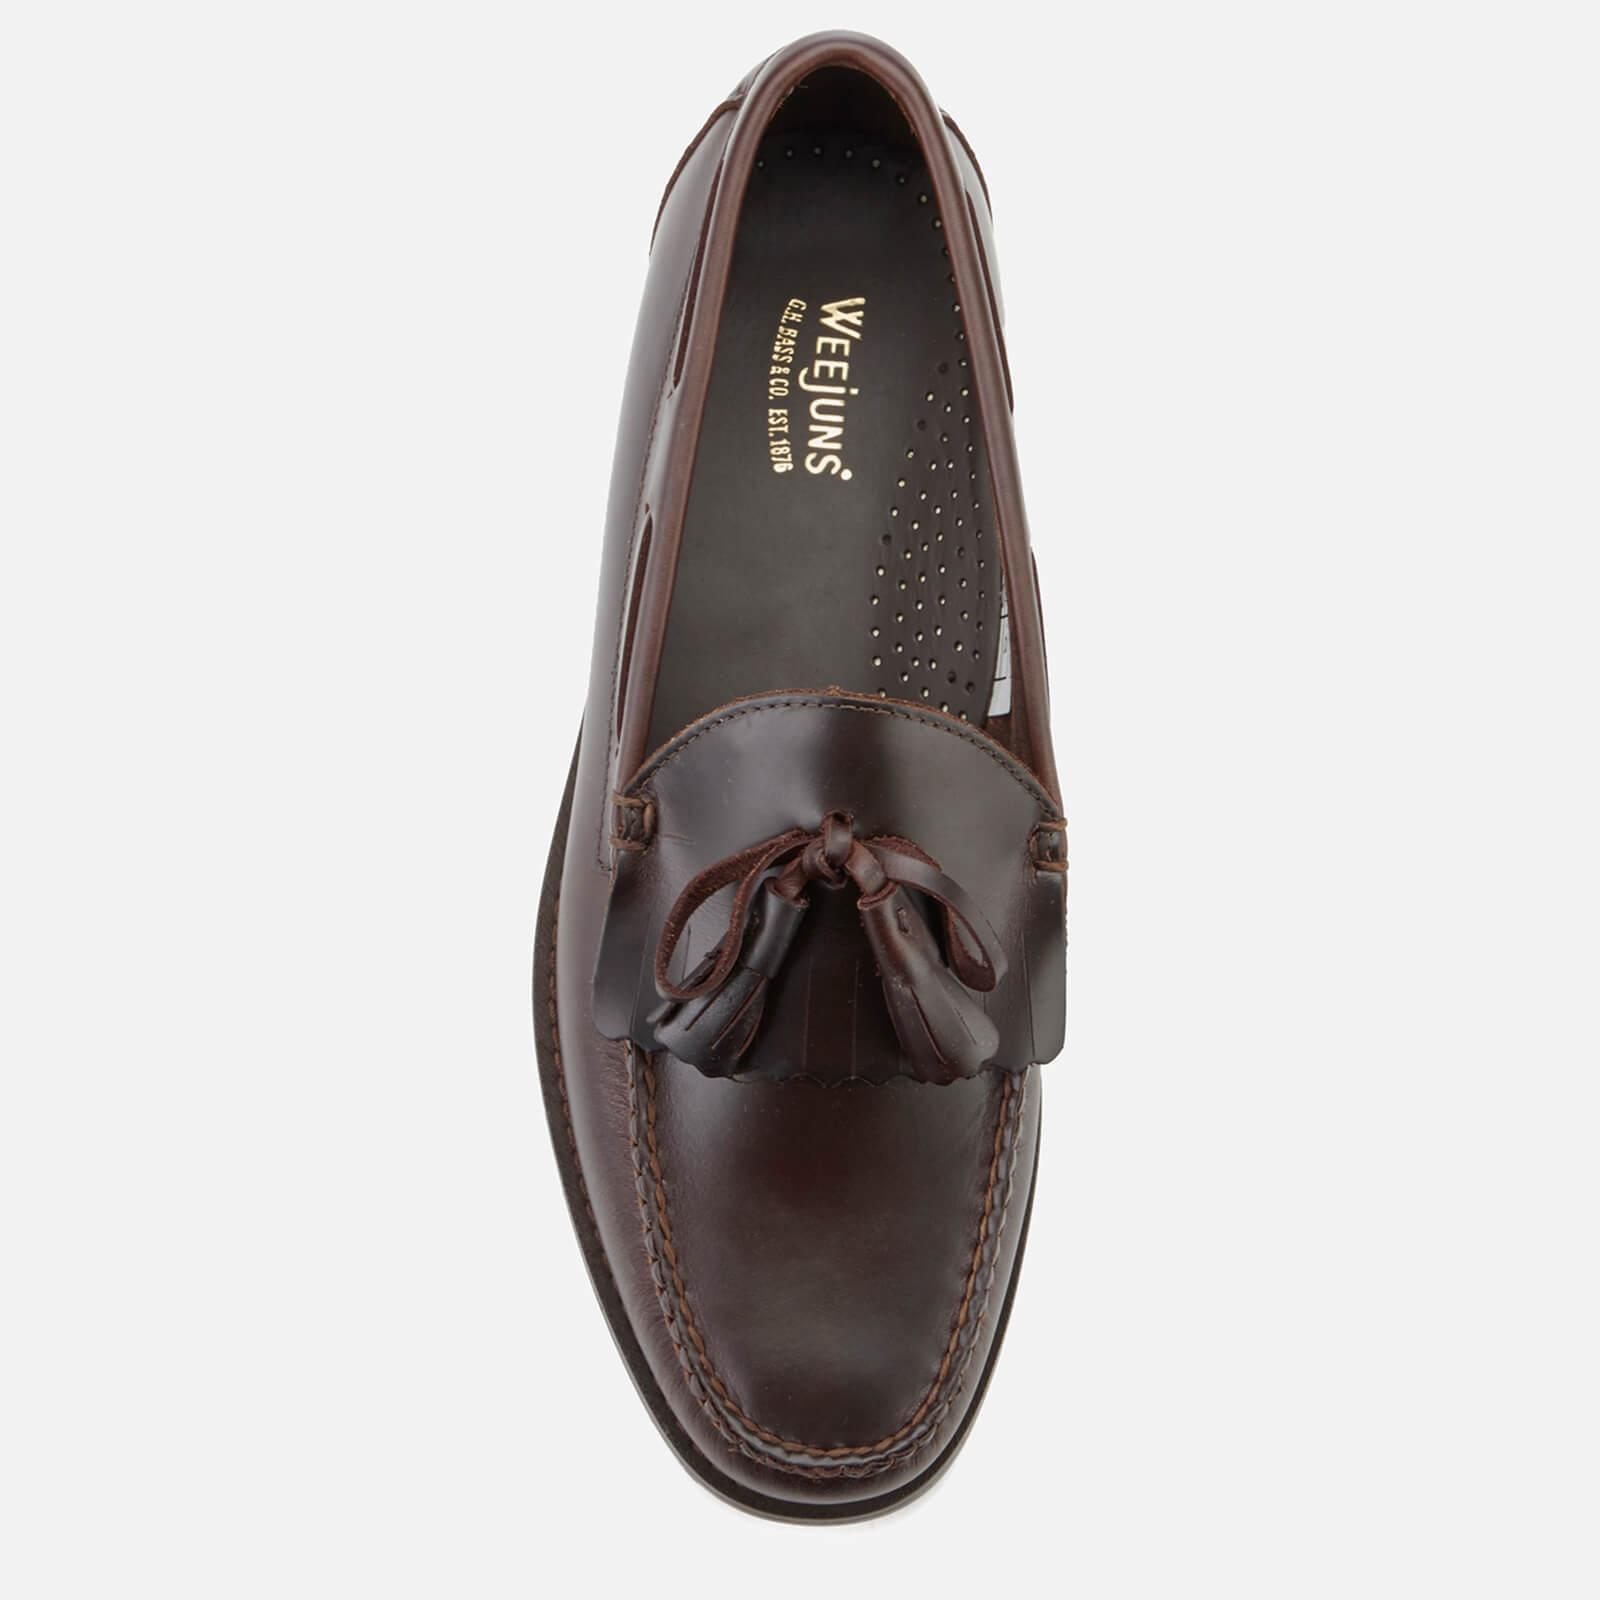 Lyst - G.H.BASS Men's Layton Kiltie Leather Loafers in Brown for Men